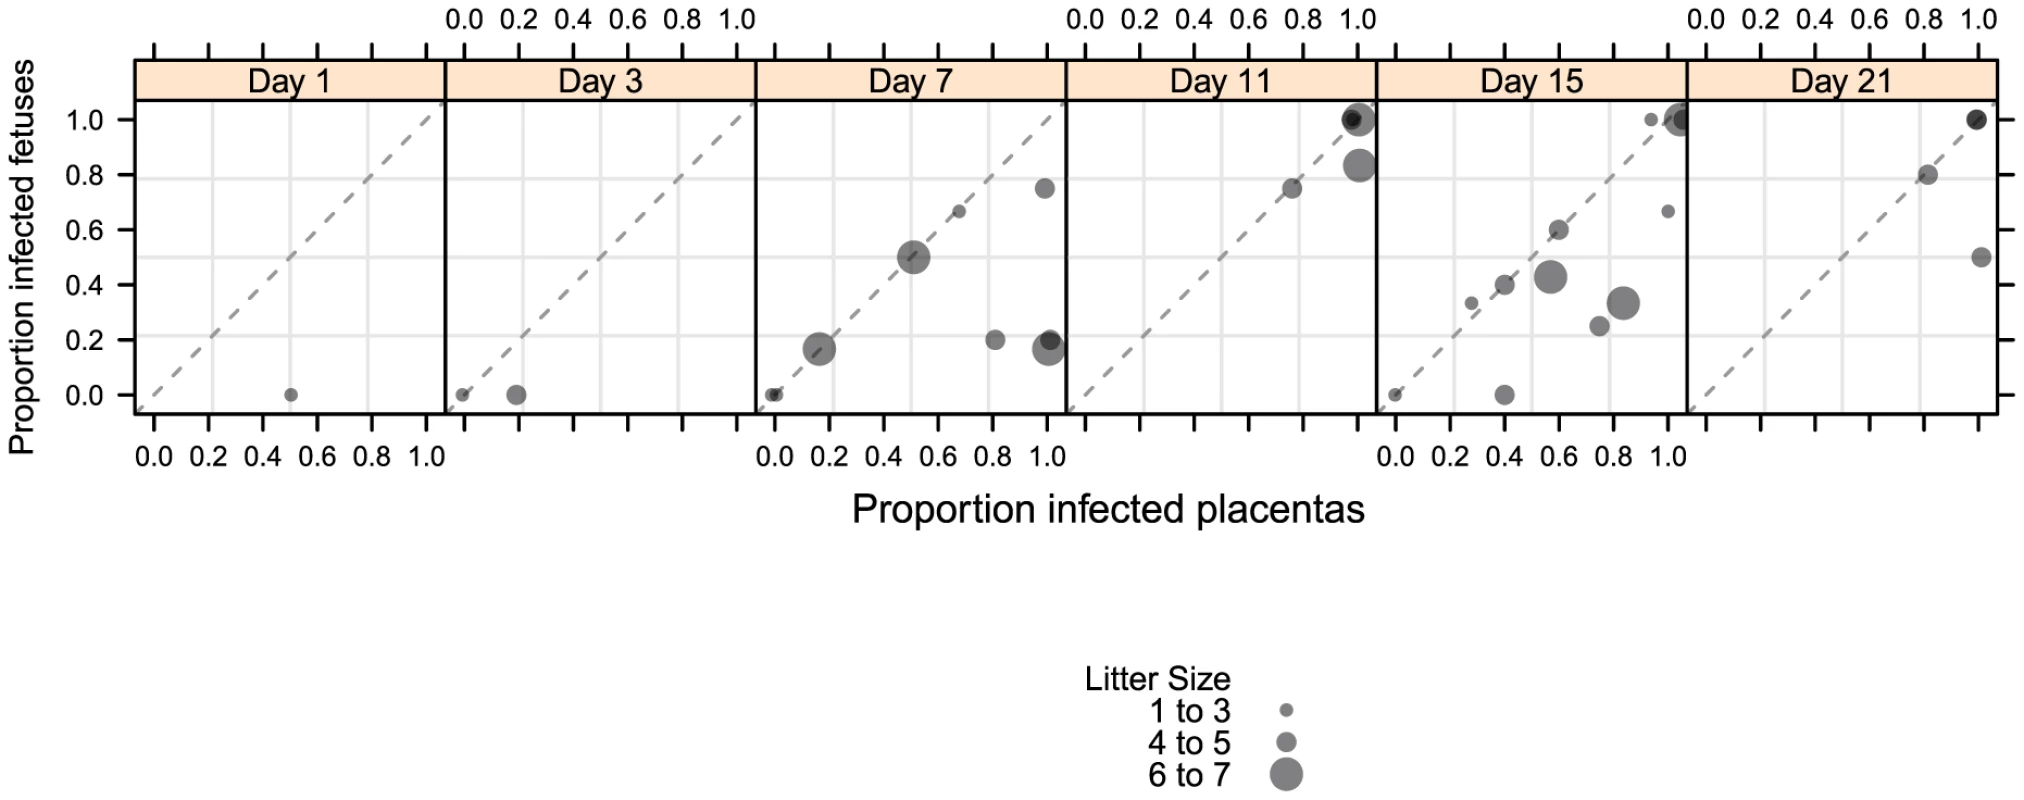 Temporal relationship between placental and fetal infection over 21 days.